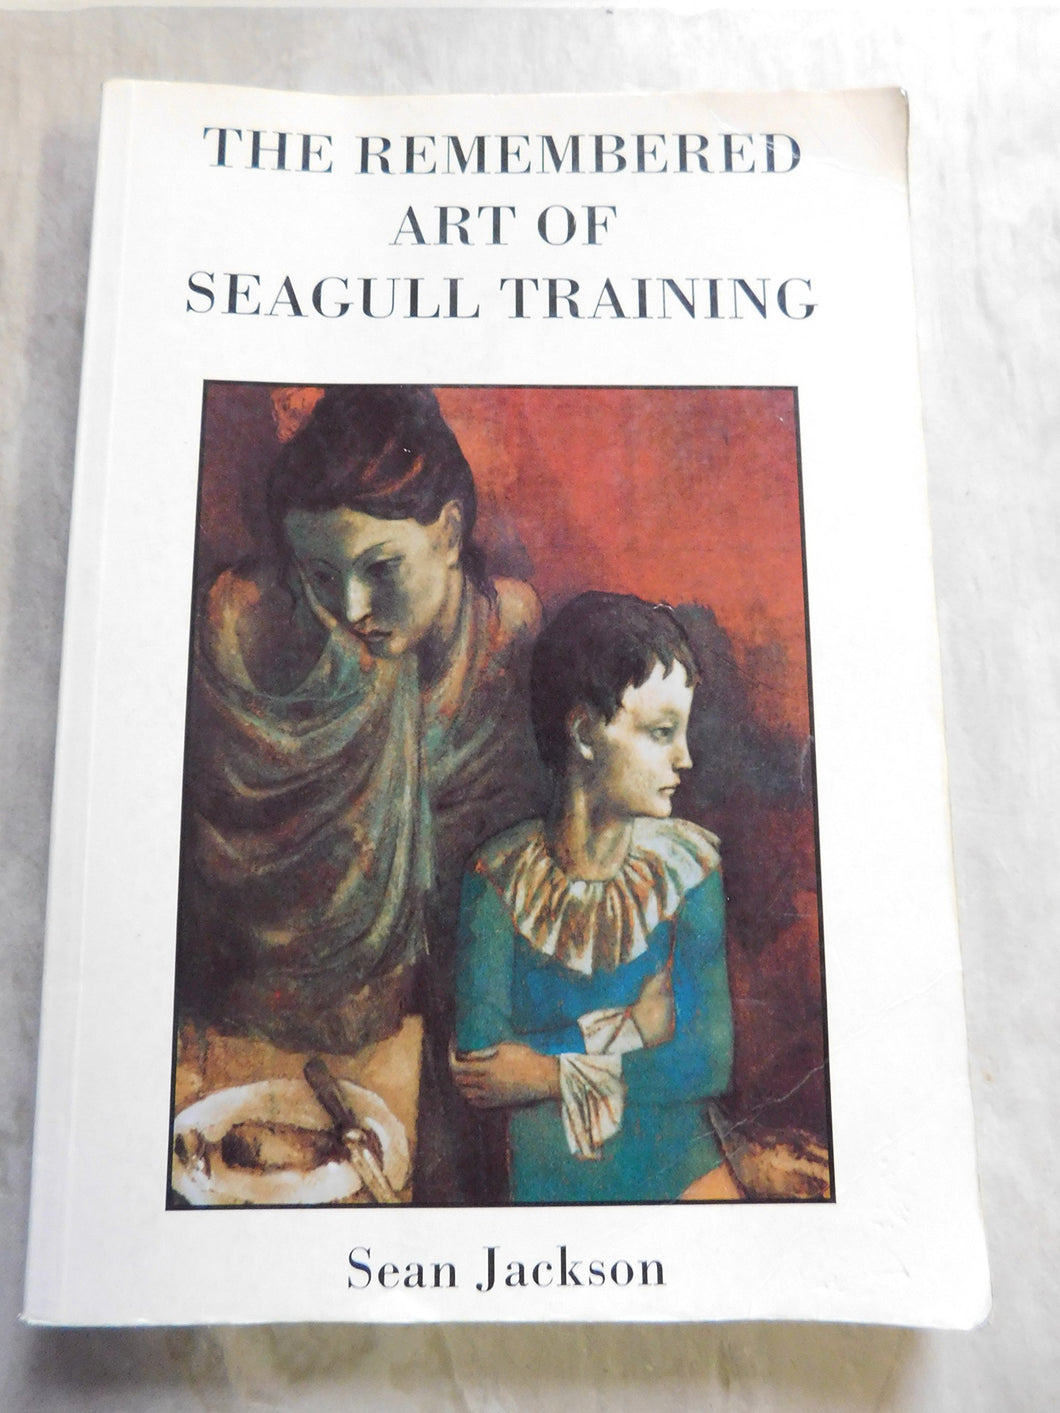 The Remembered Art of Seagull Training